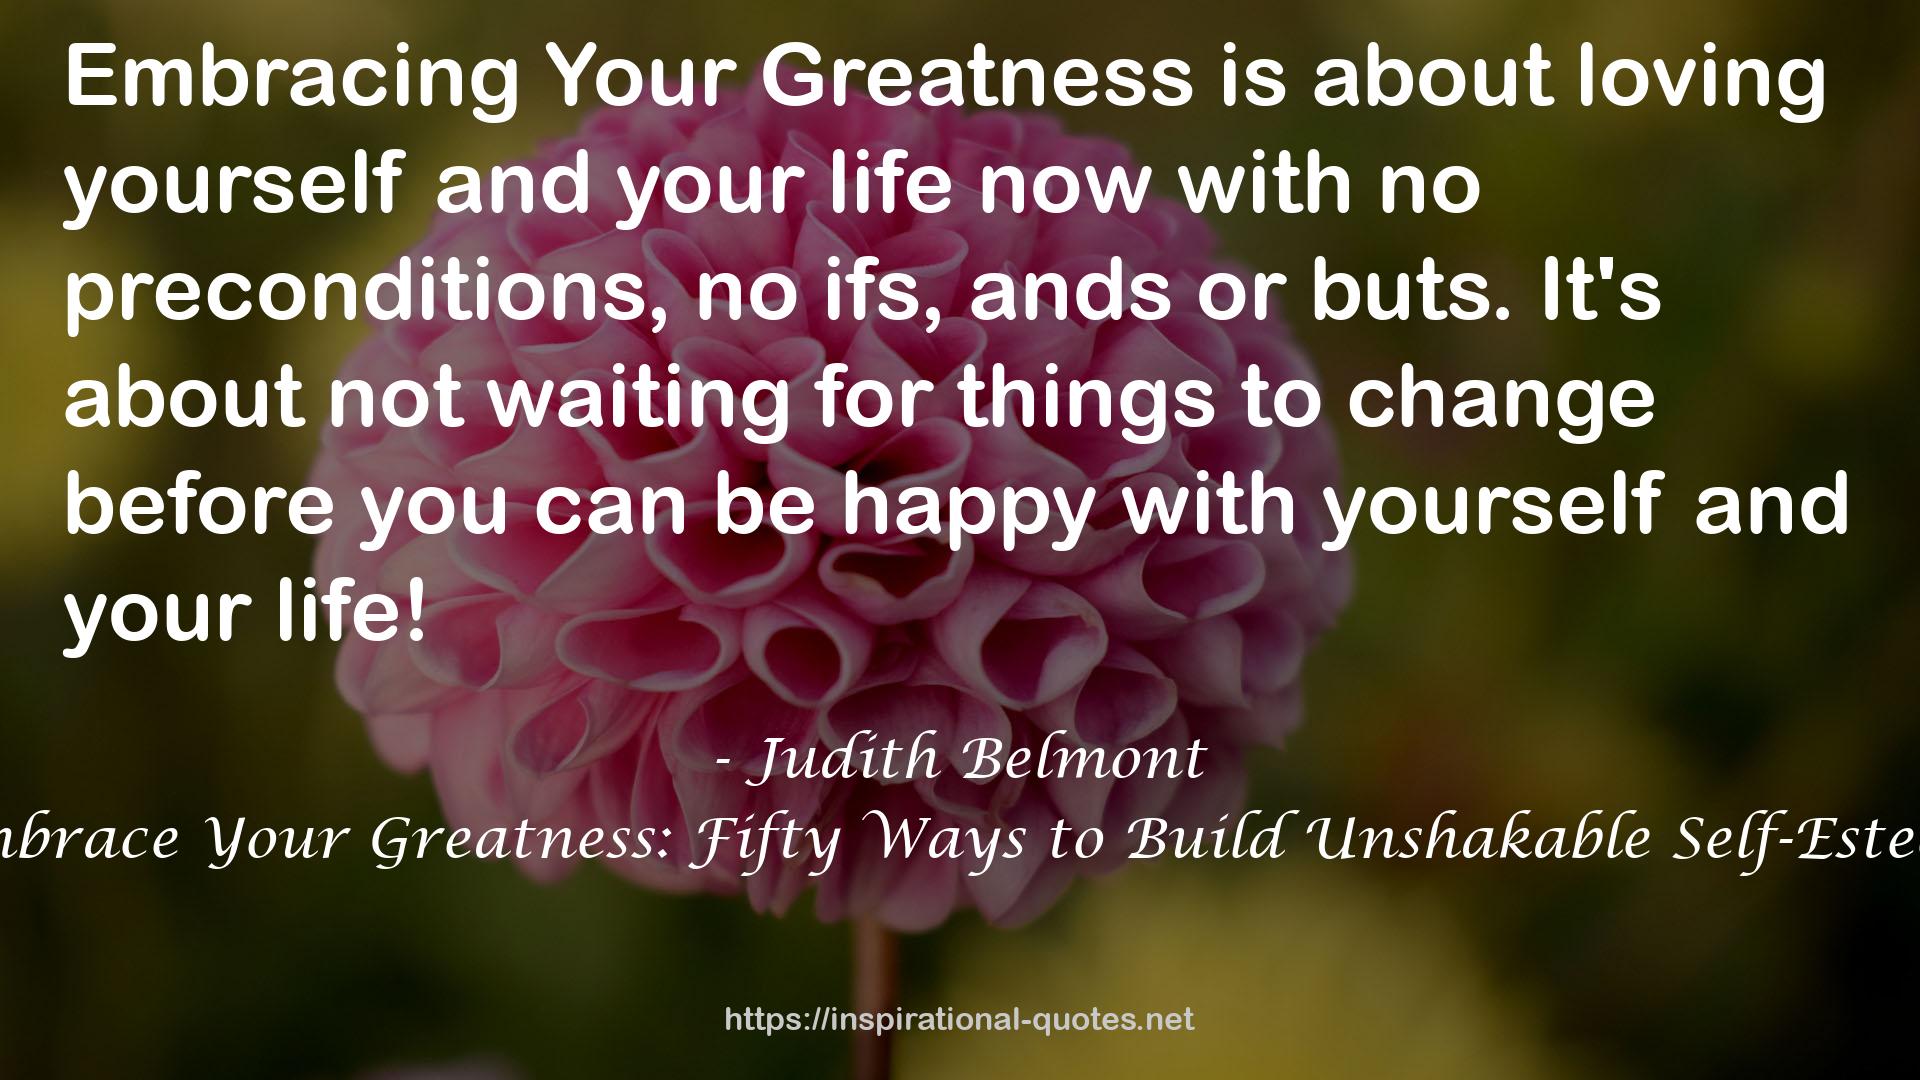 Embrace Your Greatness: Fifty Ways to Build Unshakable Self-Esteem QUOTES